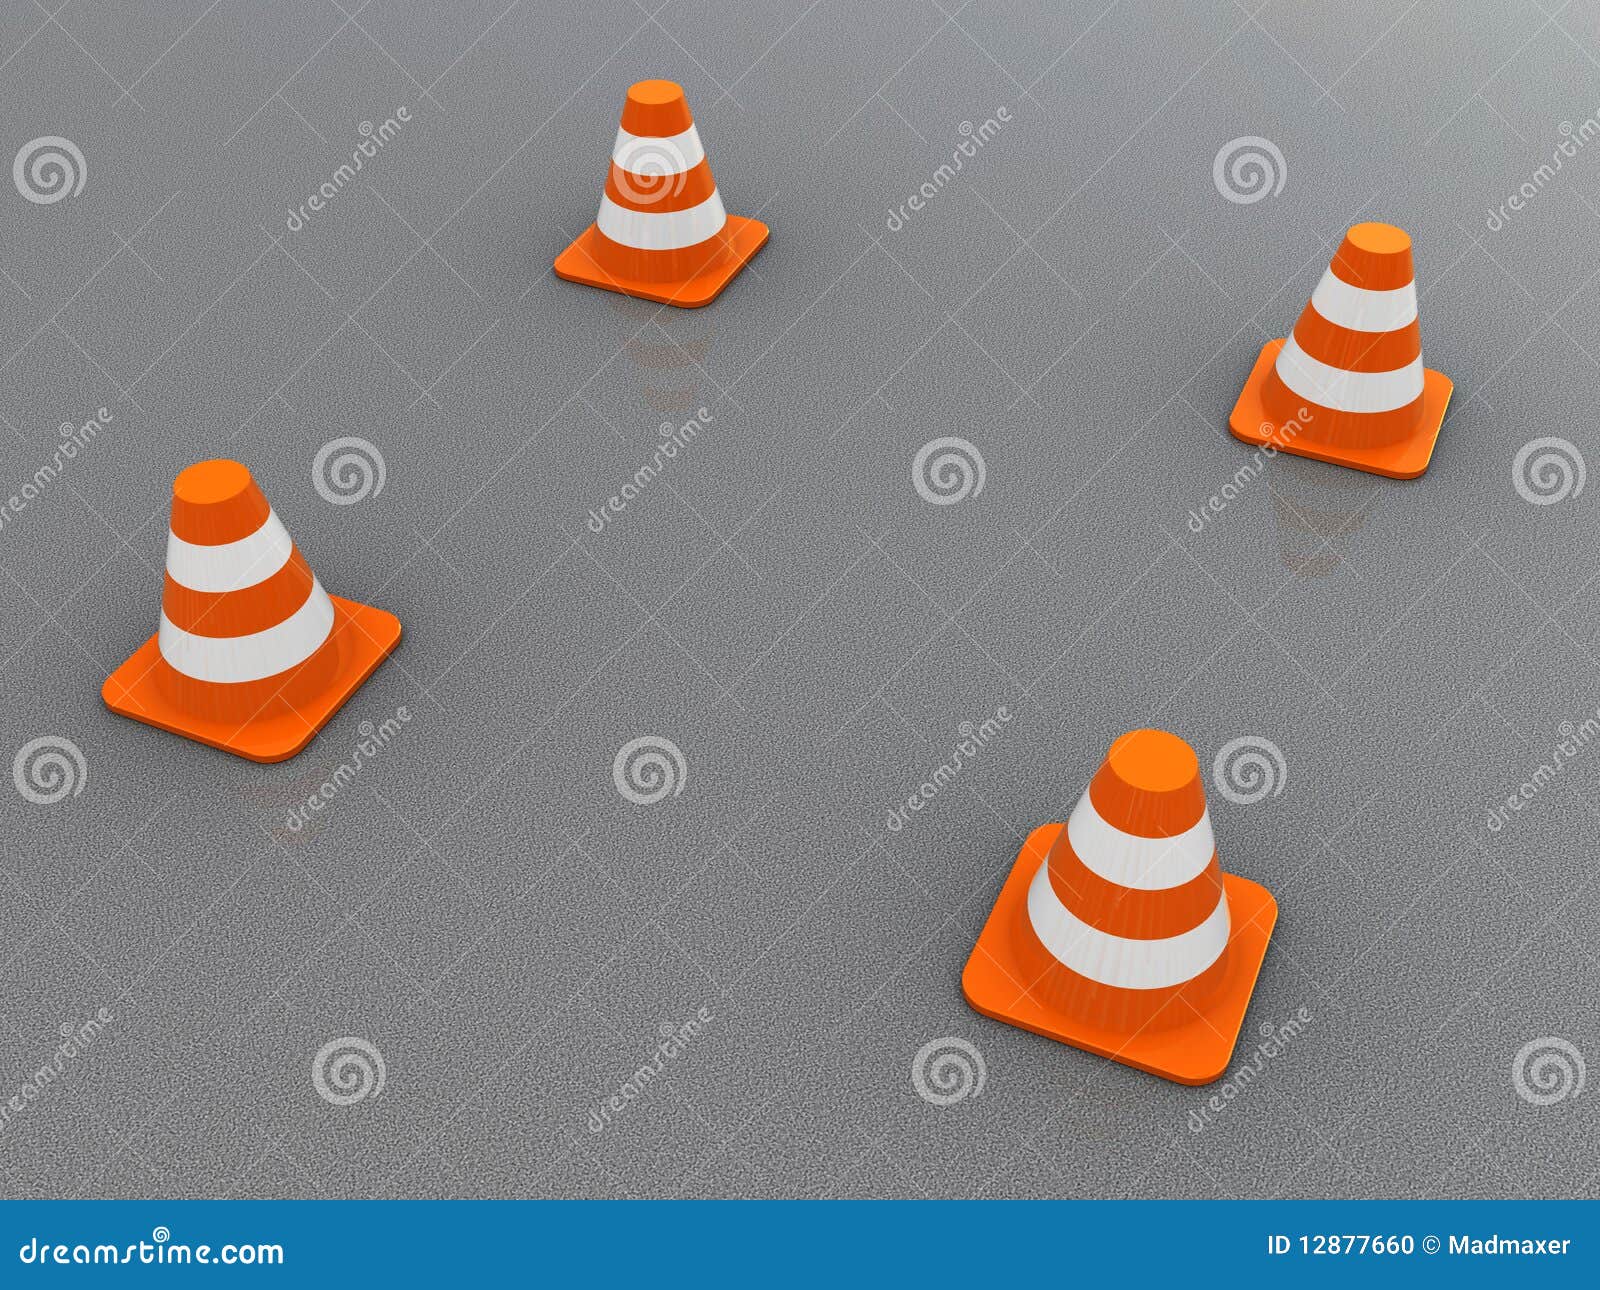 Road Construction Cone Crossword Marker Clothing